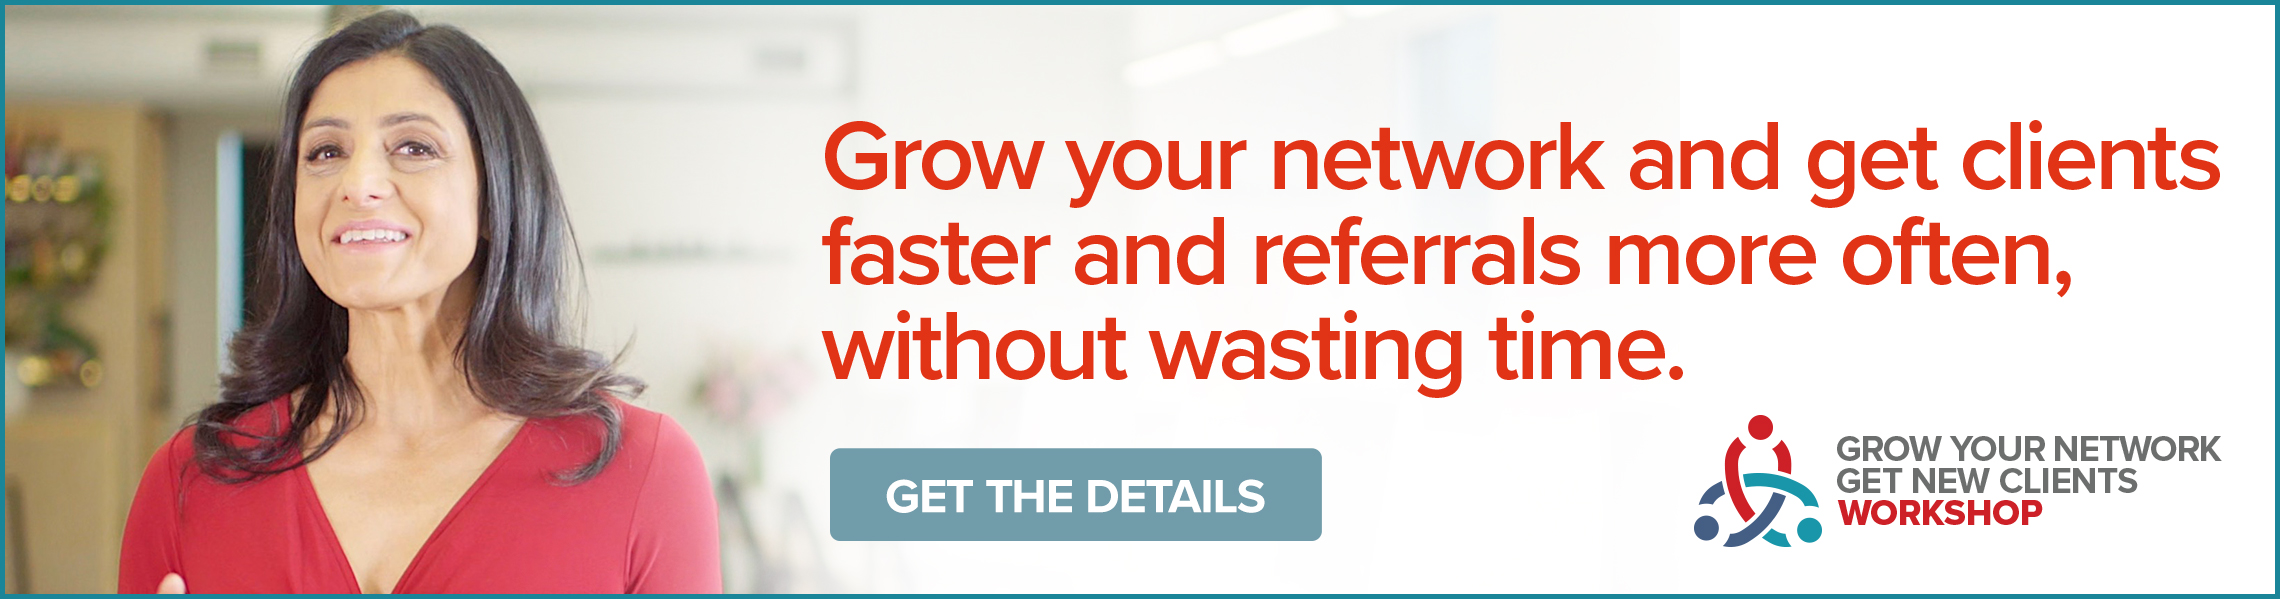 Grow Your Network Get New Clients Workshop